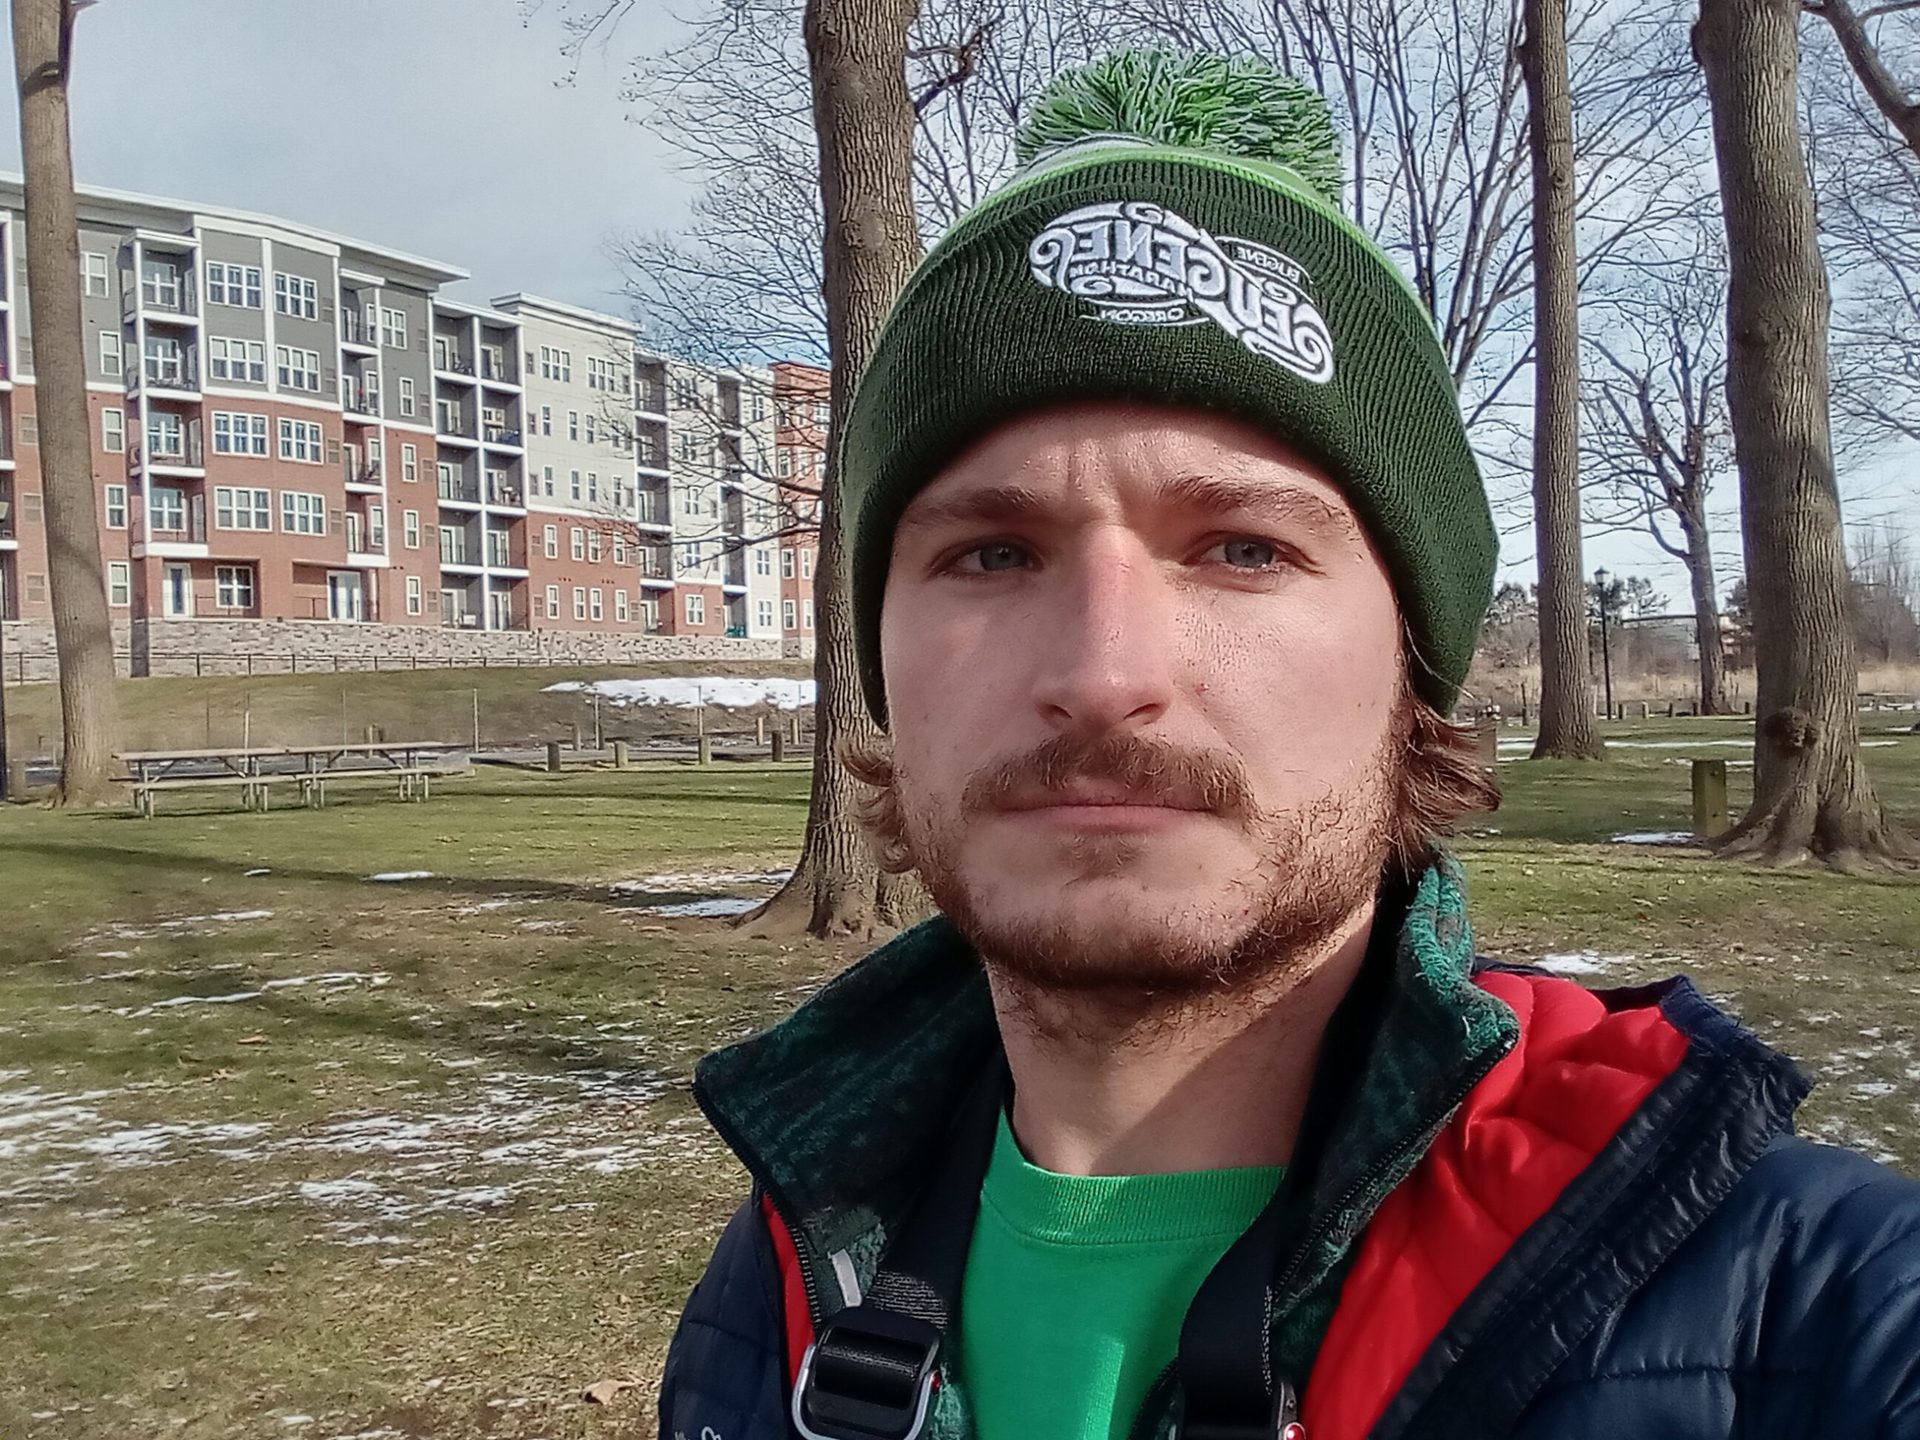 galaxy a03s standard selfie outdoors of a man with facial hair wearing a green hat, green t-shirt, and red and black coat, with buildings and trees visible behind him.